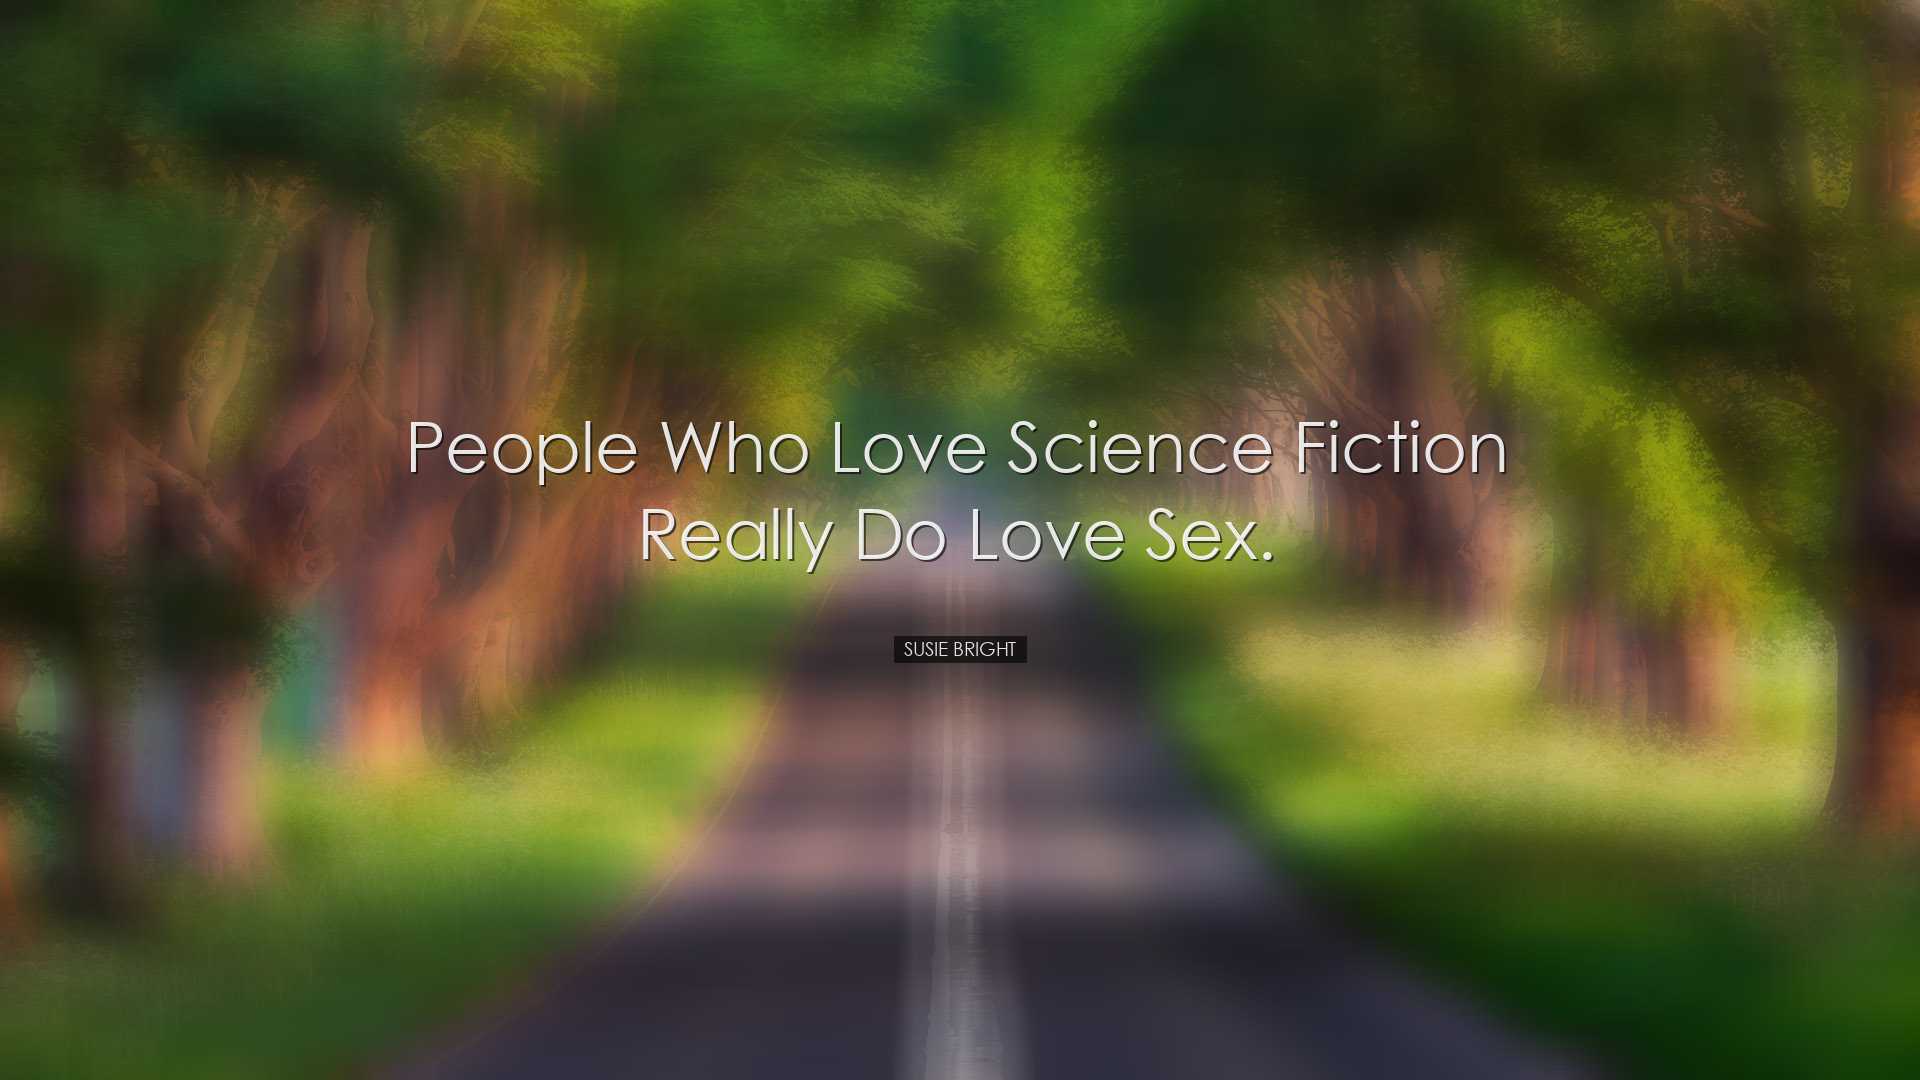 People who love science fiction really do love sex. - Susie Bright